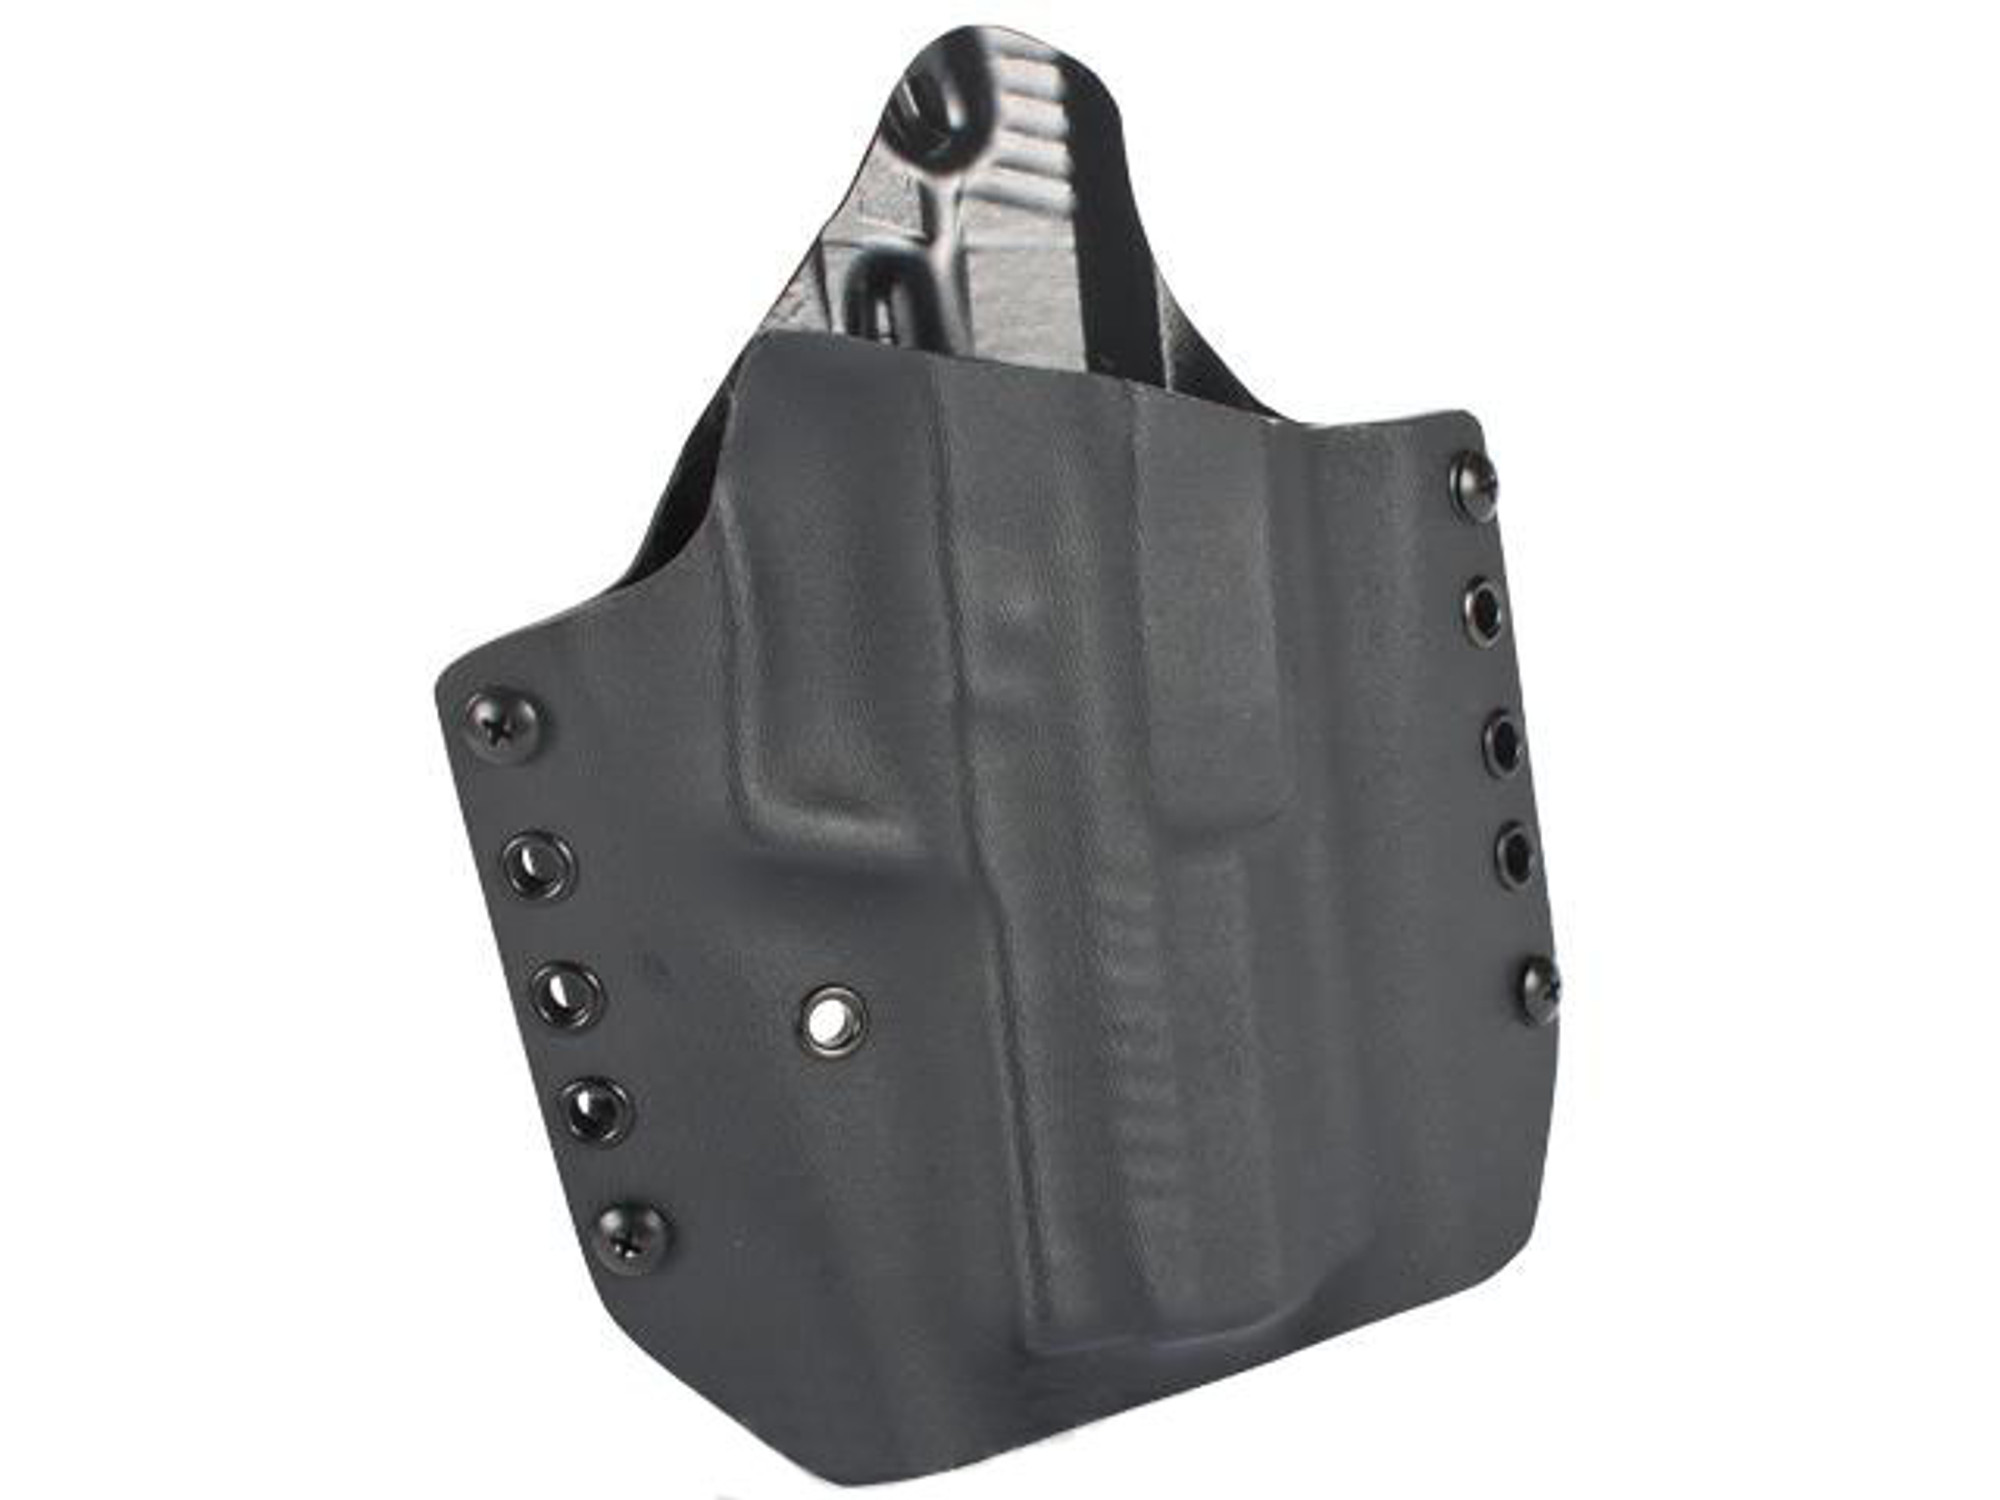 KAOS Concealment Kydex Belt / MOLLE Holster - KWA USP Tactical (Right / Black)